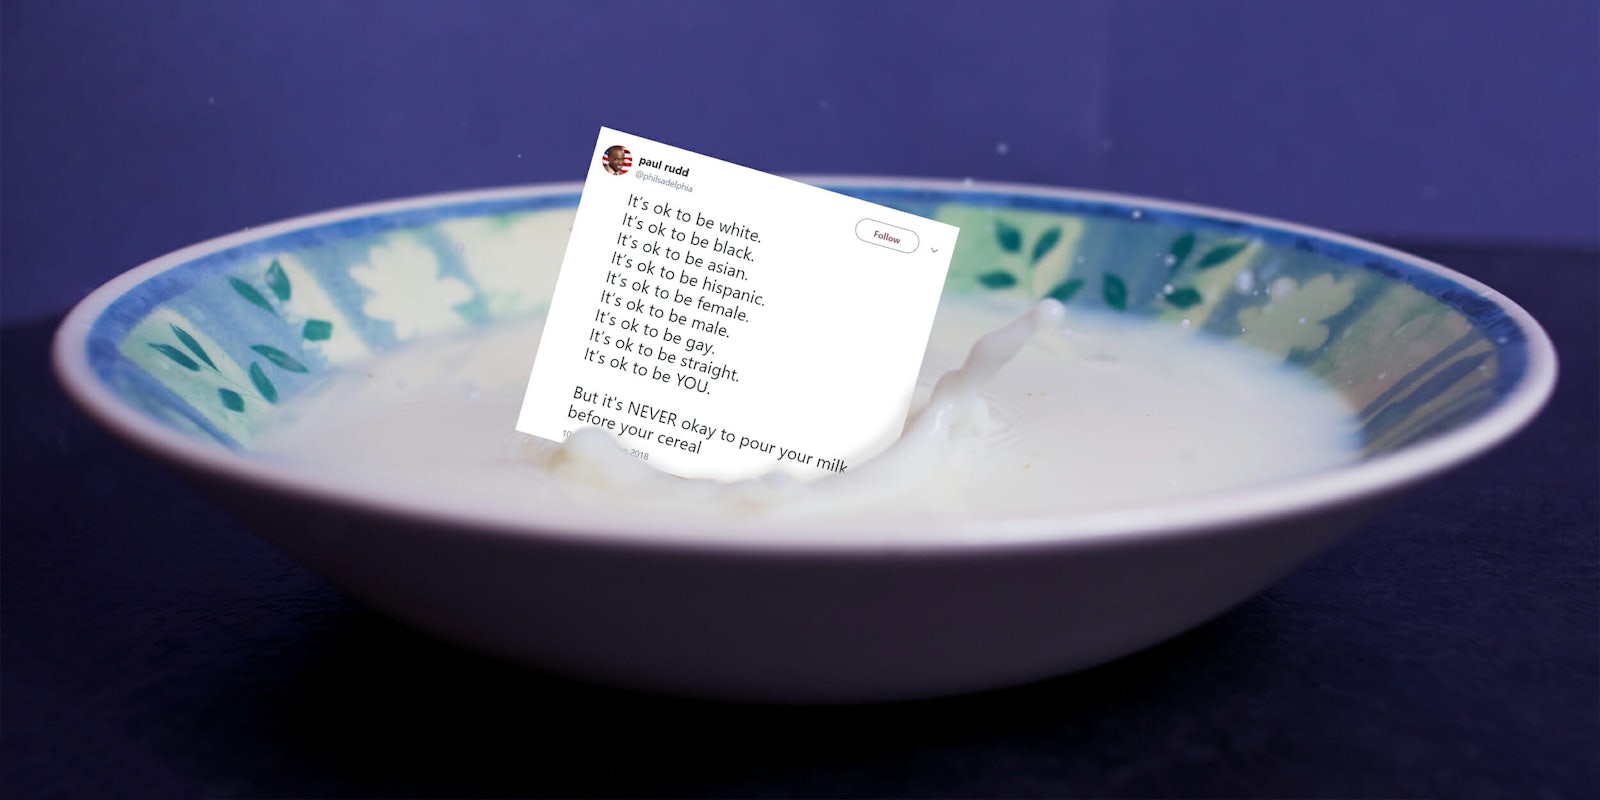 'It's ok to be' meme tweet dropping into a bowl of milk